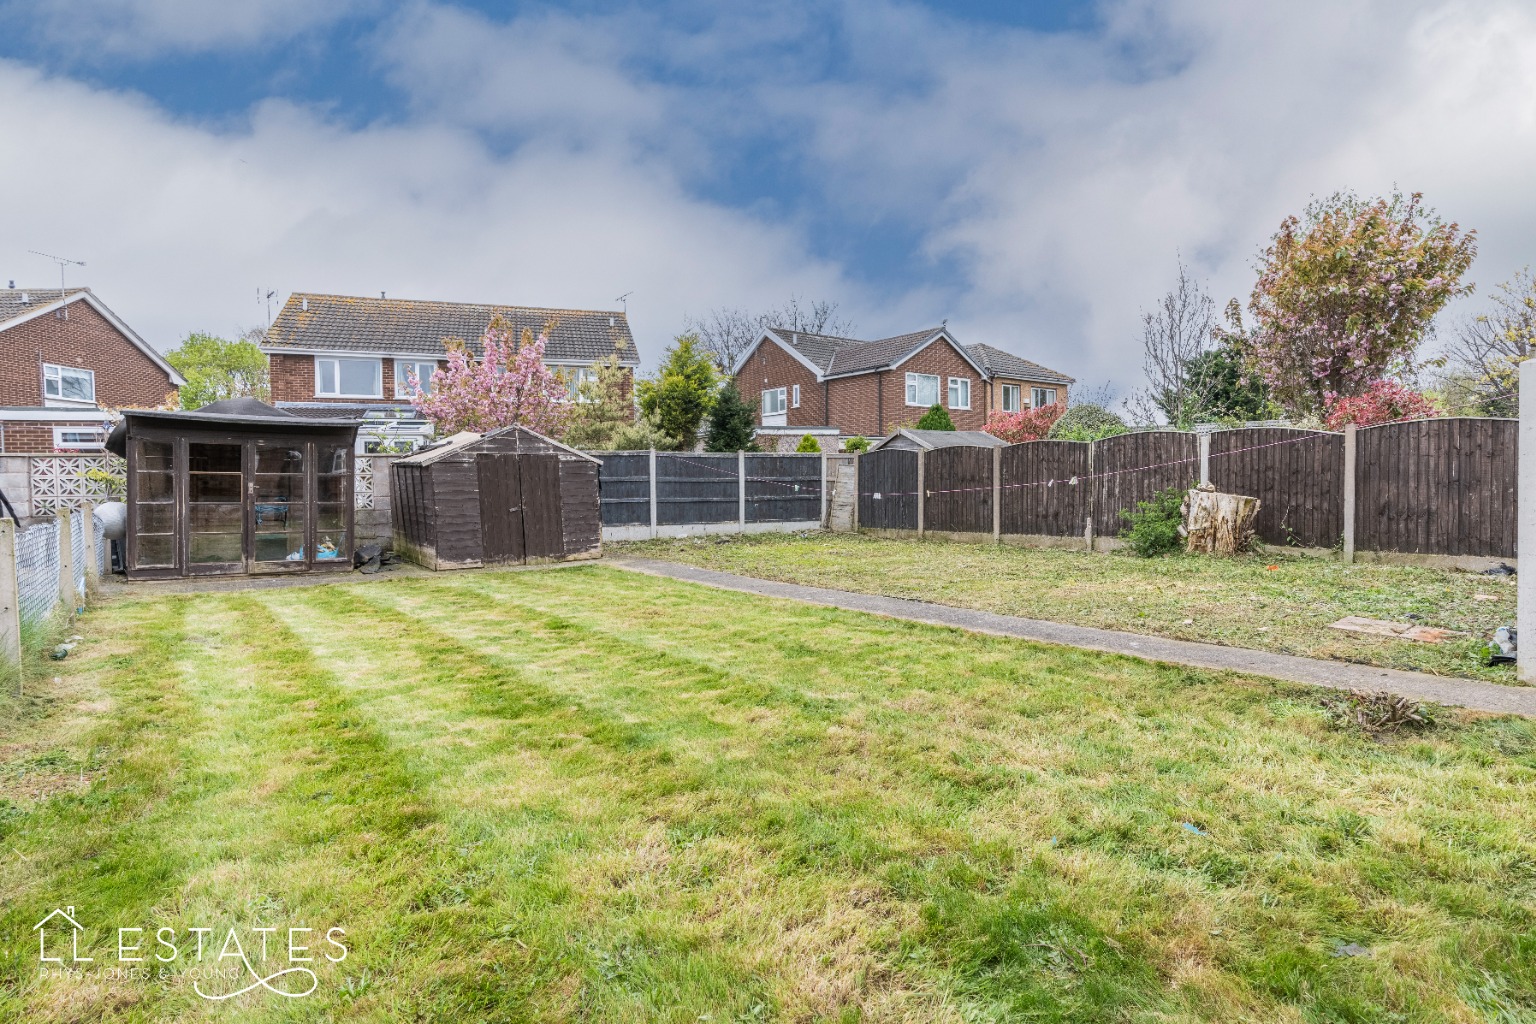 3 bed end of terrace house for sale in Ffordd-Y-Morfa  - Property Image 2